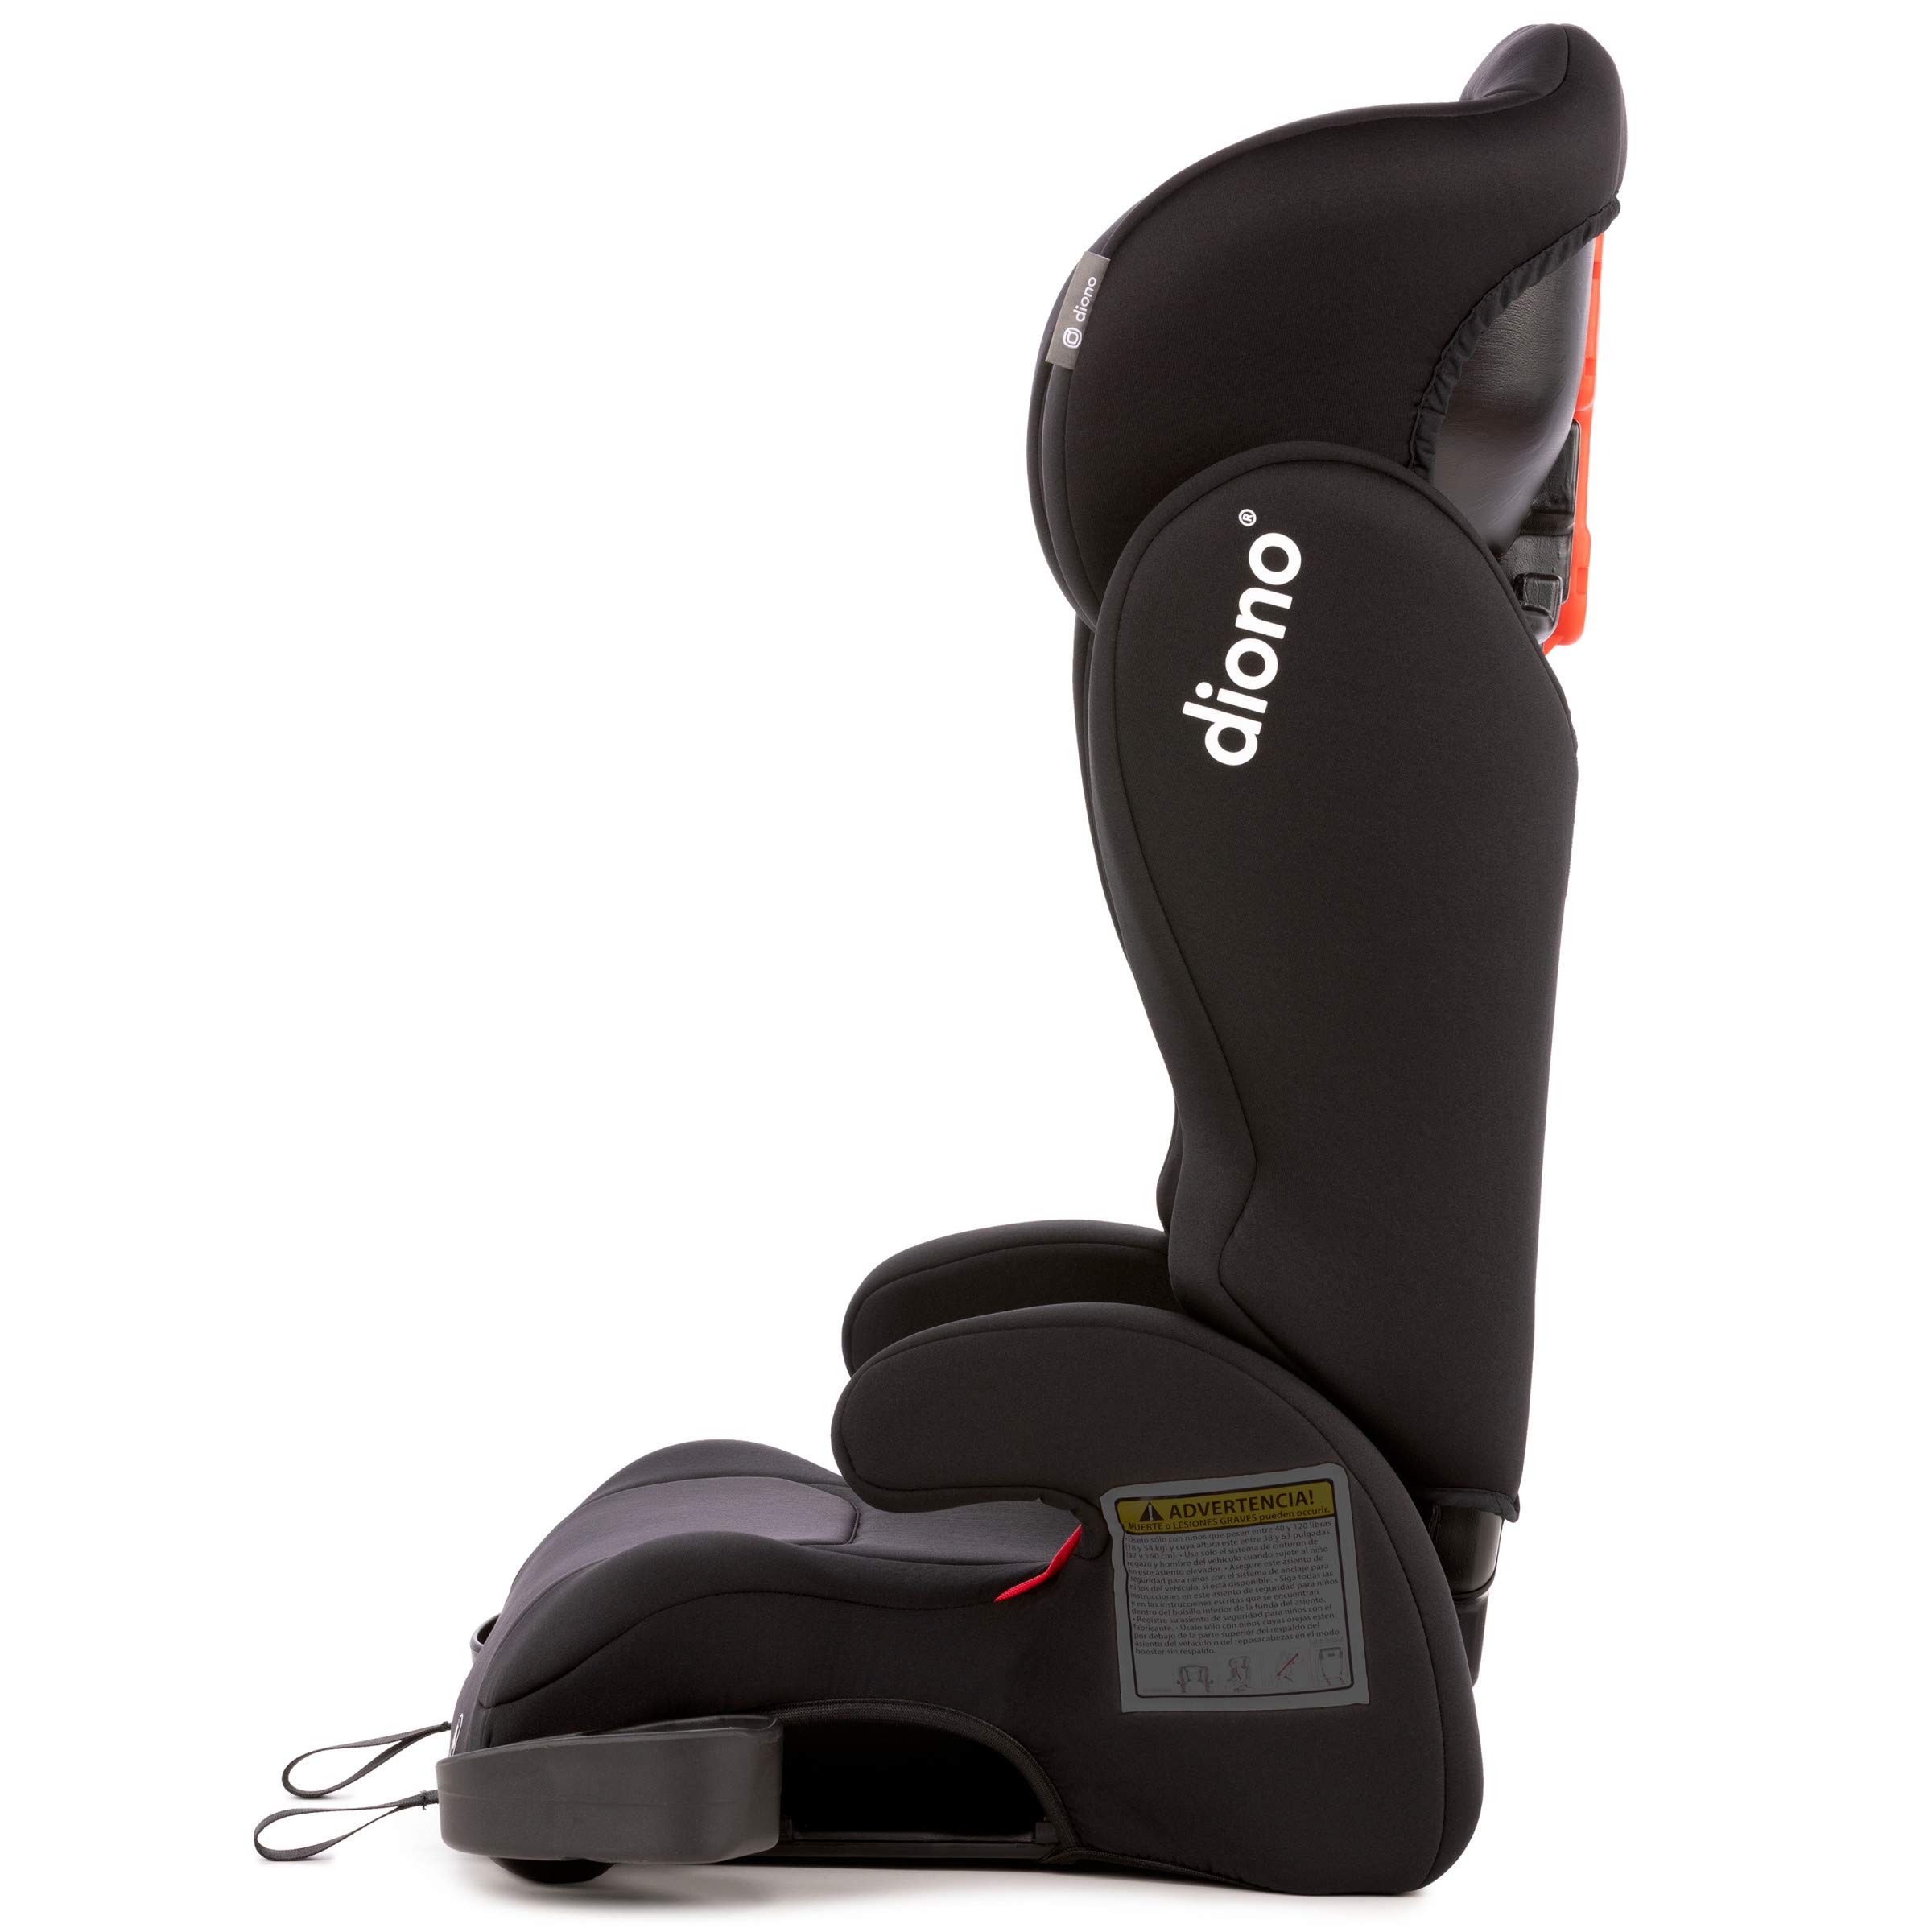 Diono Cambria 2 XL 2022, Dual Latch Connectors, 2-in-1 Belt Positioning Booster Seat, High-Back to Backless Booster with Space and Room to Grow, 8 Years 1 Booster Seat, Black